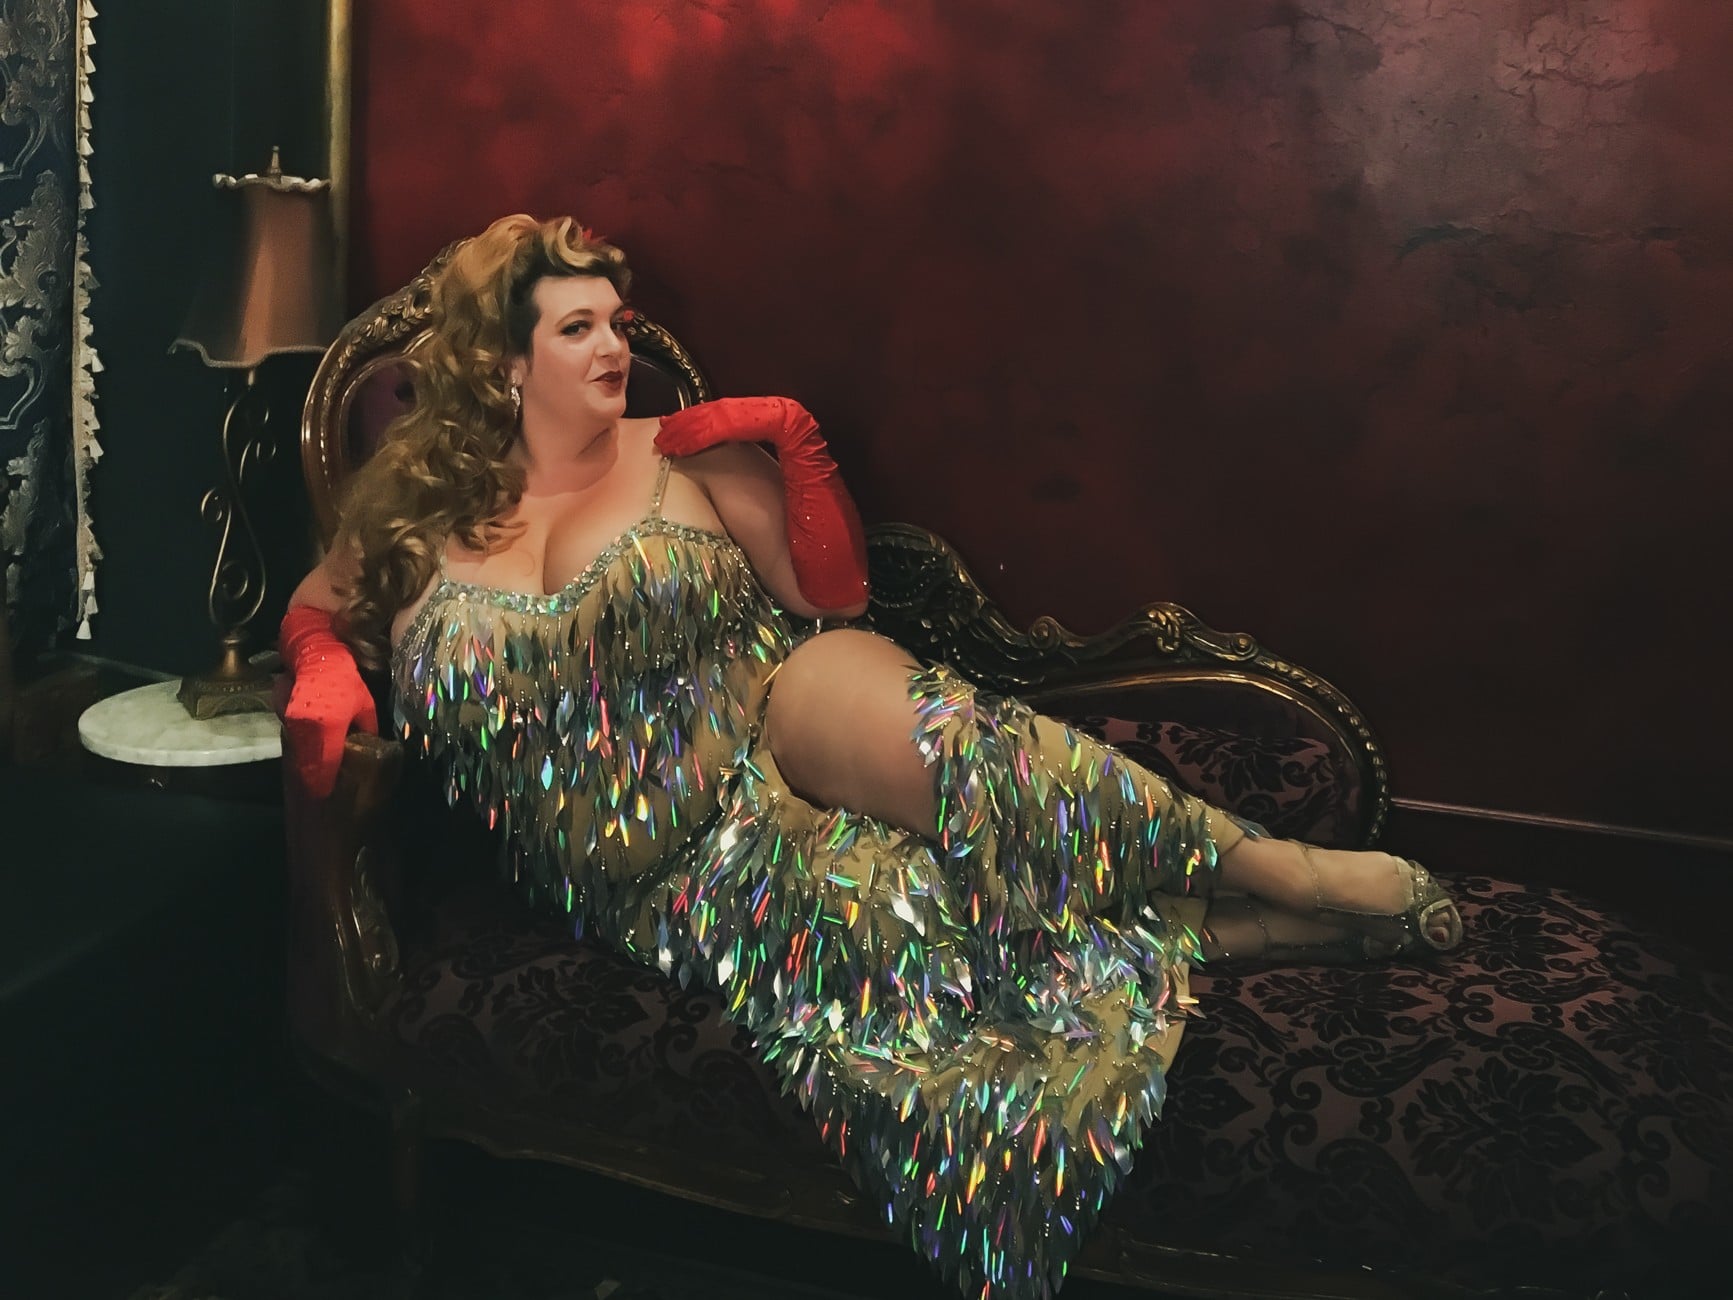 Image shows Jezebel reclining on a chaise in a sparkly silver dres and smiling into the camera above the title "26 Gifts For Traveling Showgirls and Burlesque Dancers"